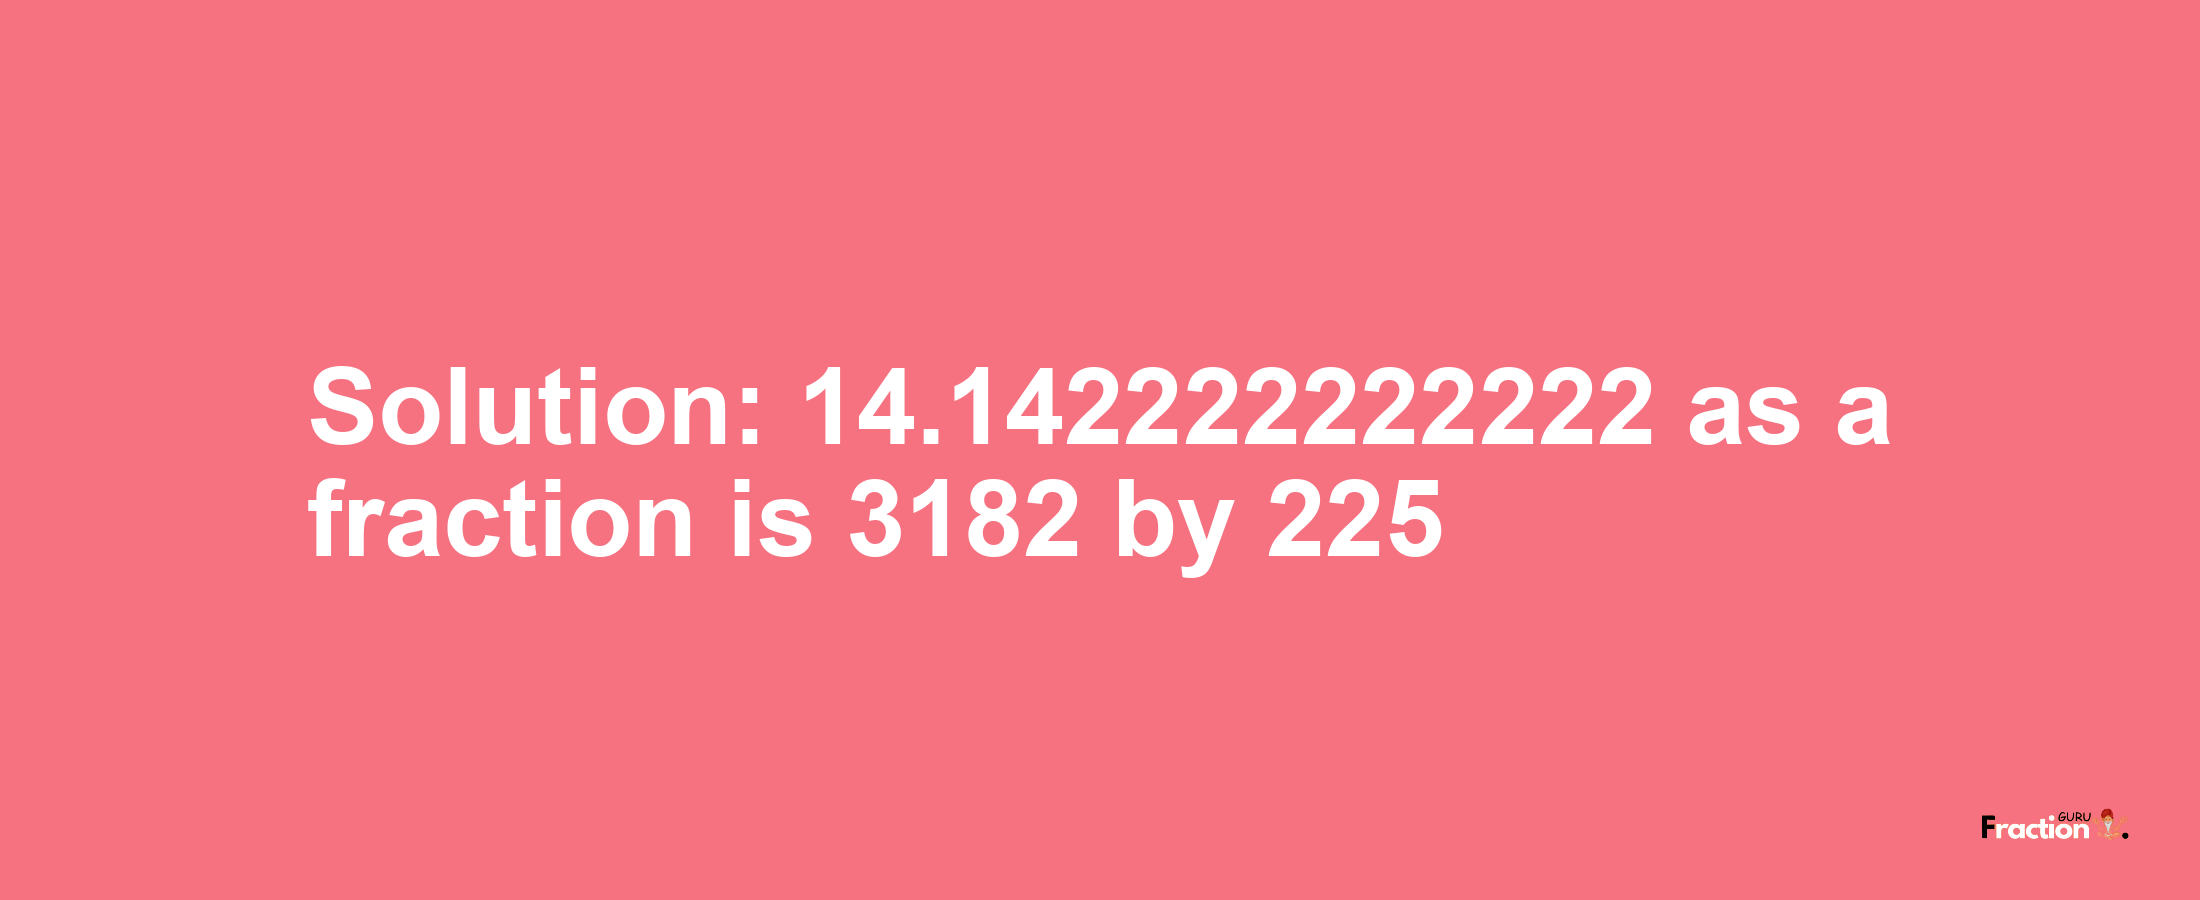 Solution:14.142222222222 as a fraction is 3182/225